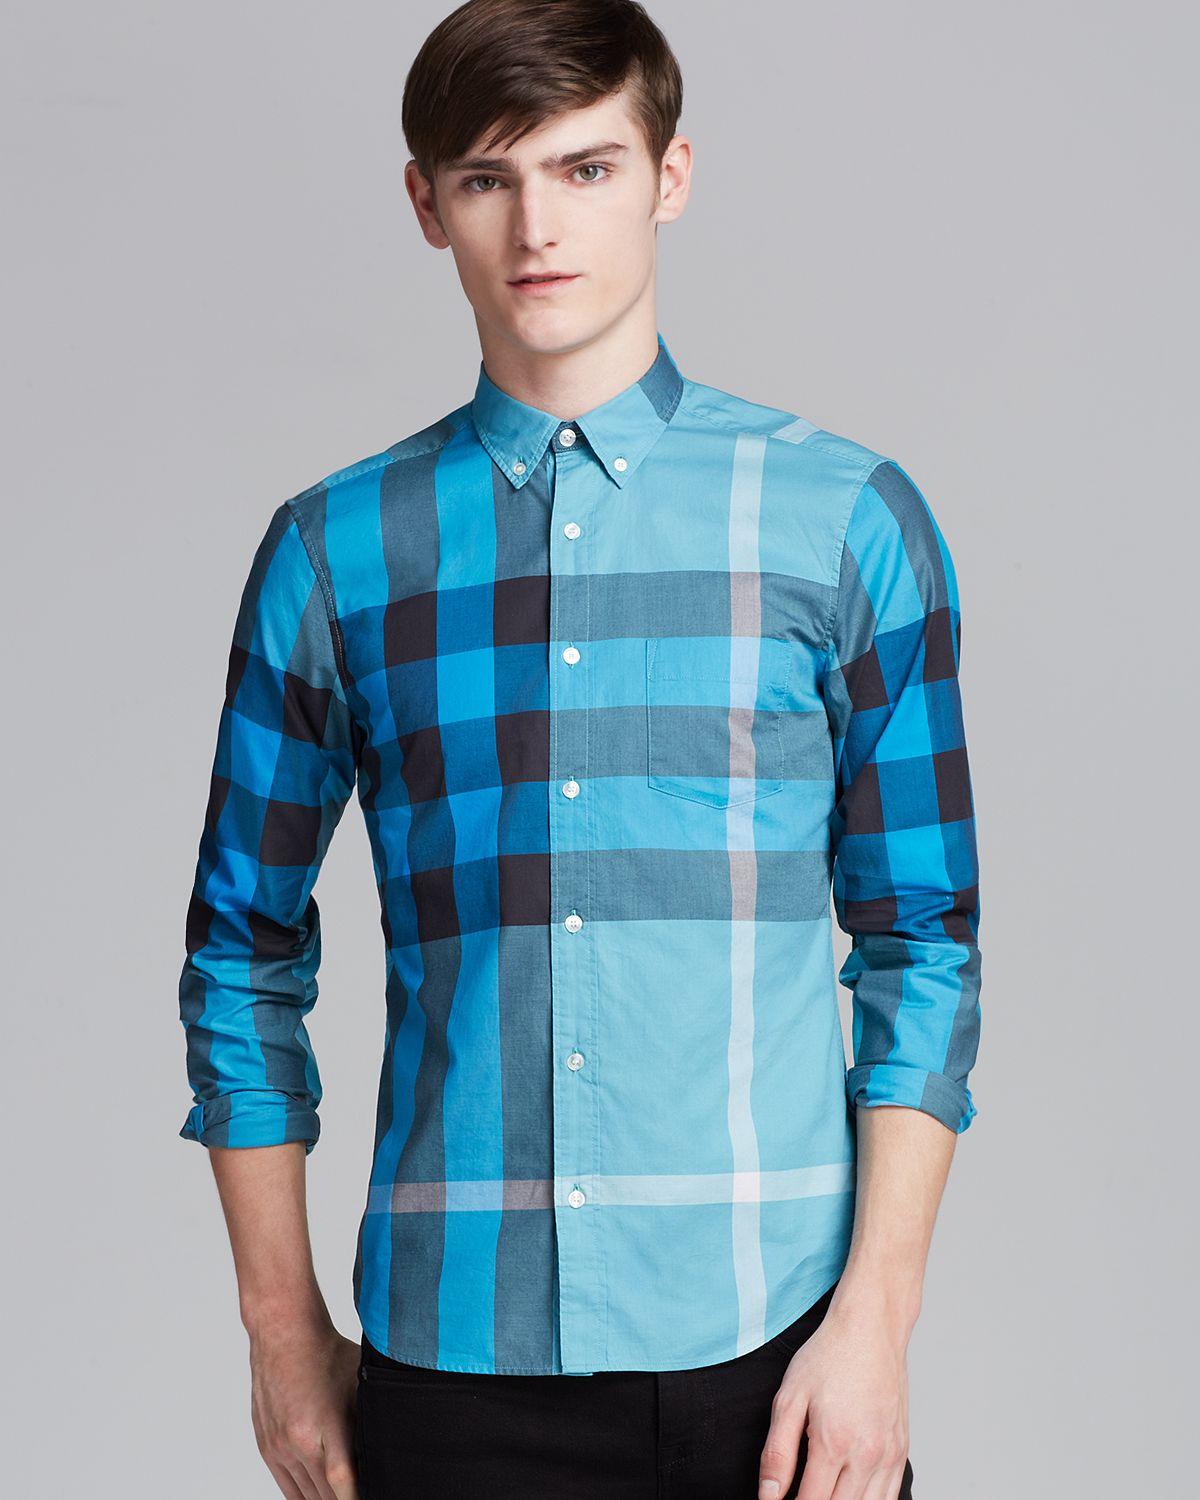 Lyst - Burberry Brit Fred Exploded Check Sport Shirt Classic Fit in ...